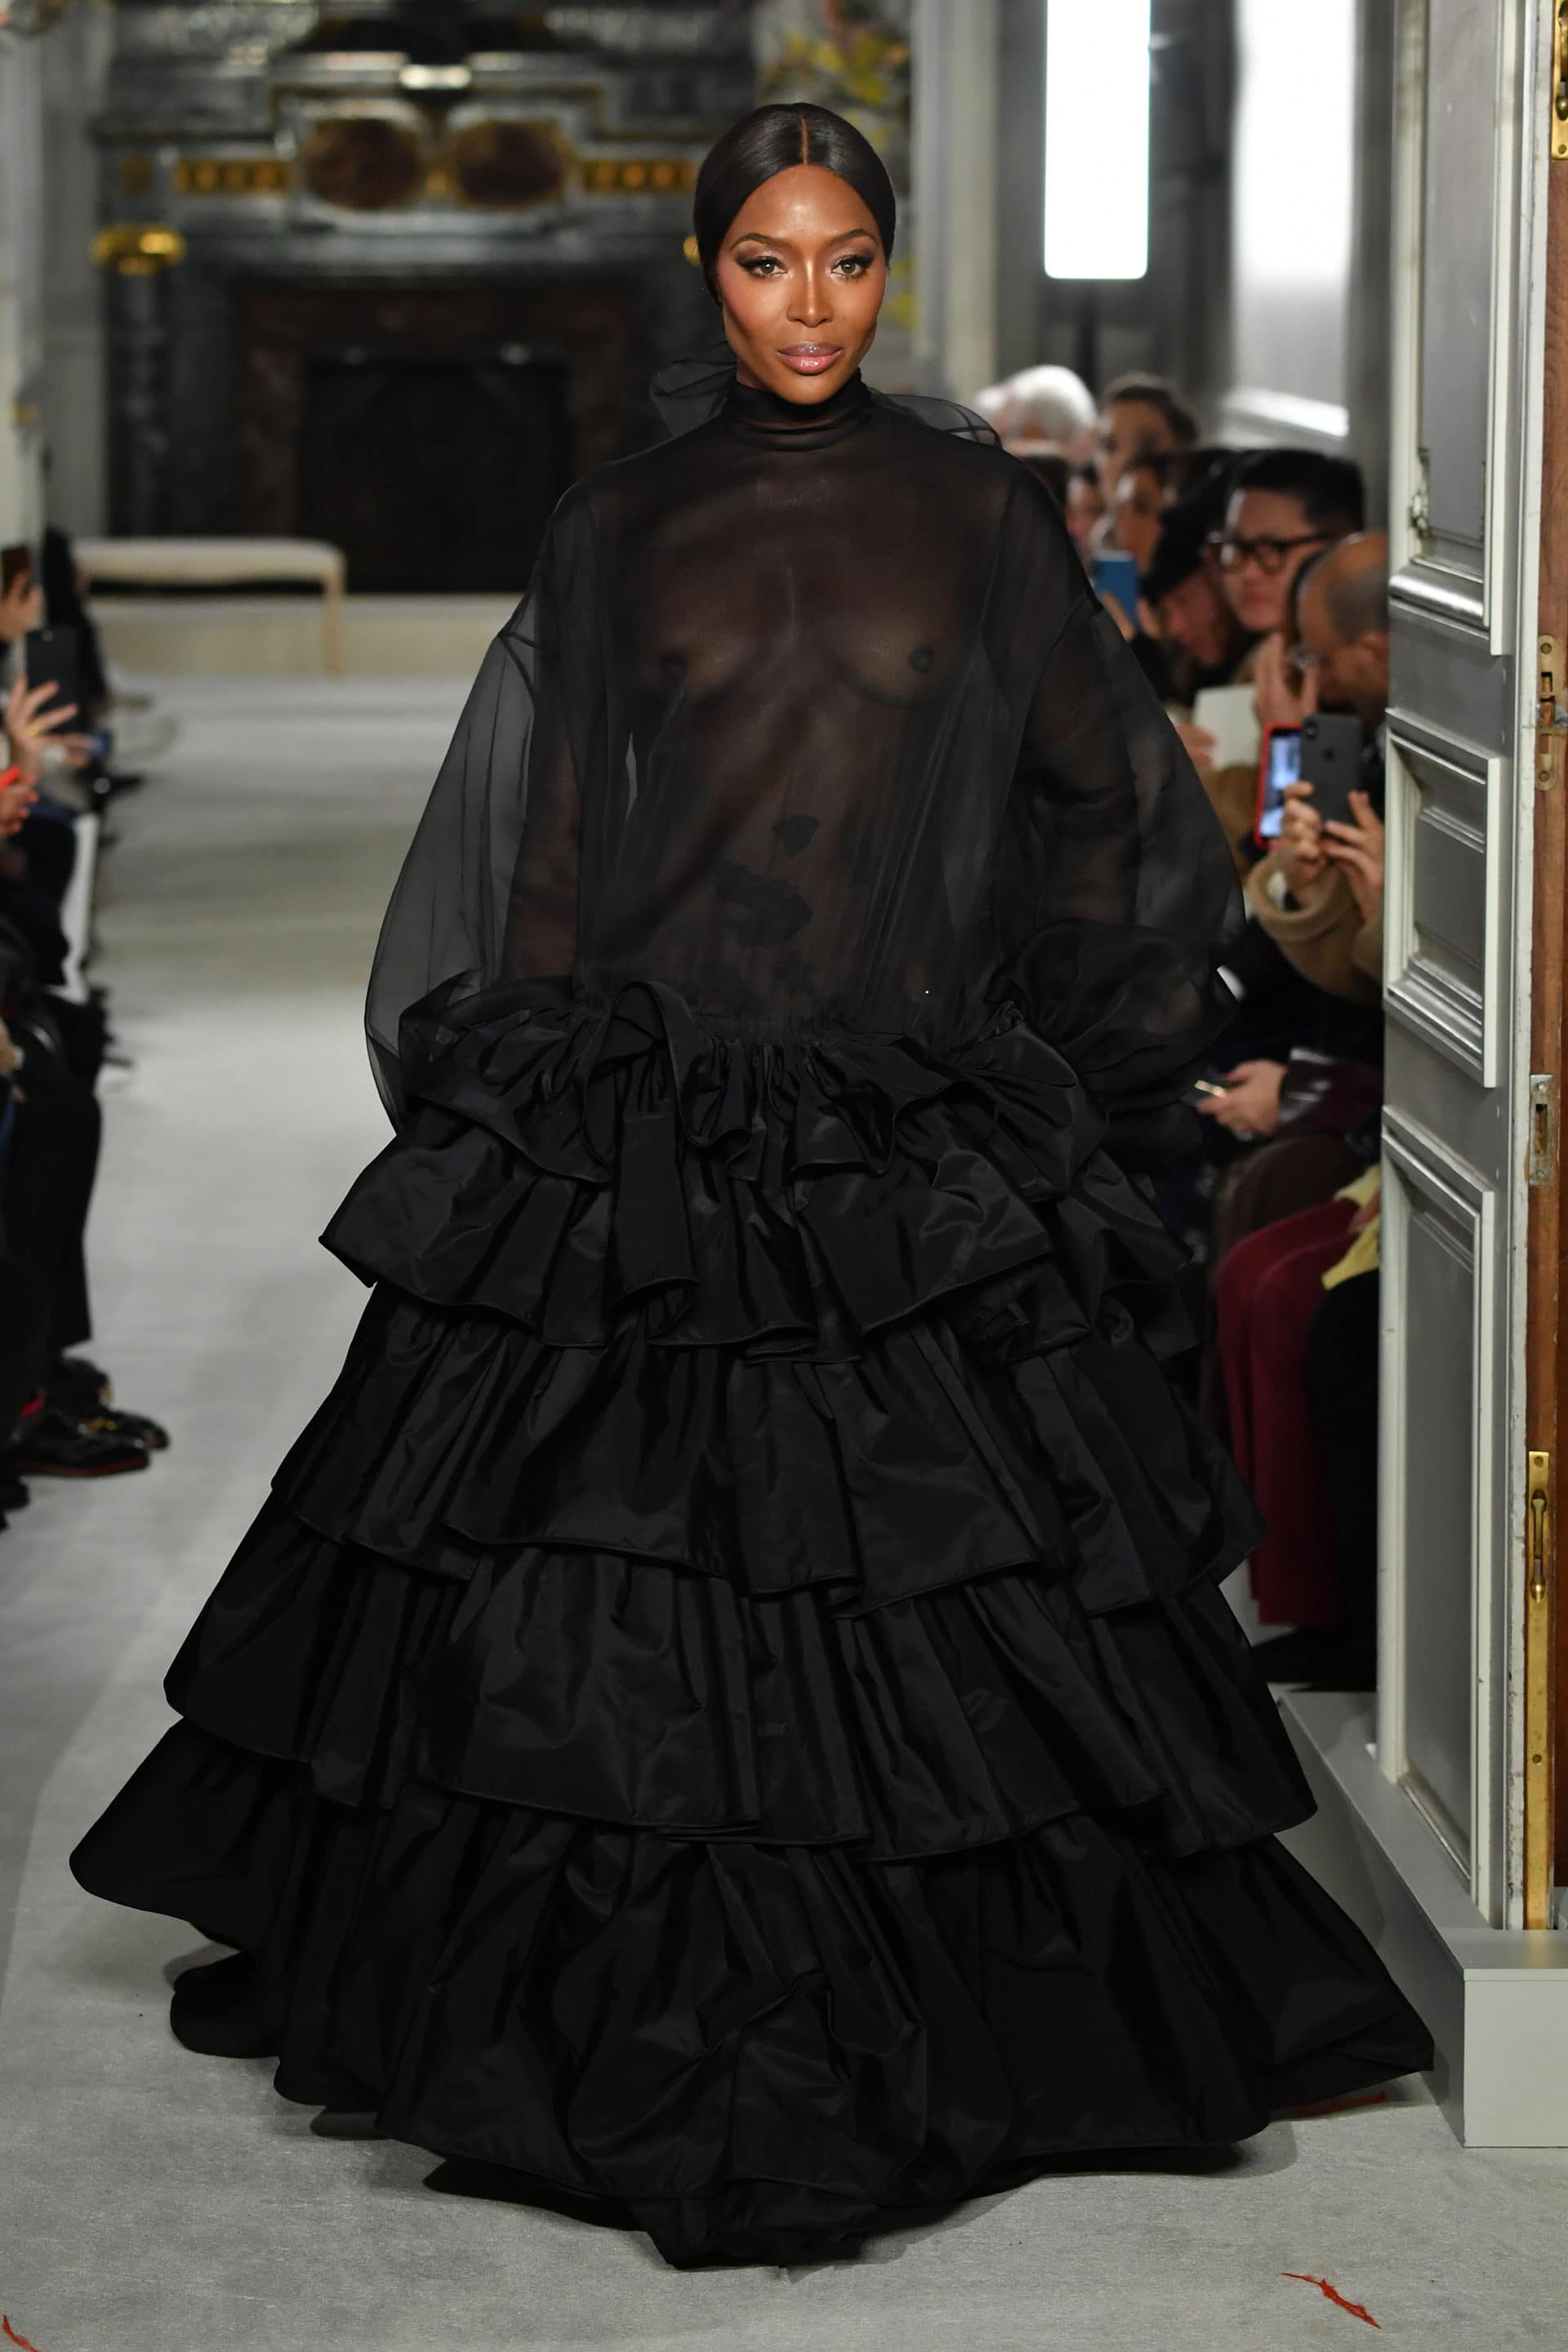 Valentino’s Haute Couture Show Included 43 Black Models—Including Naomi Campbell